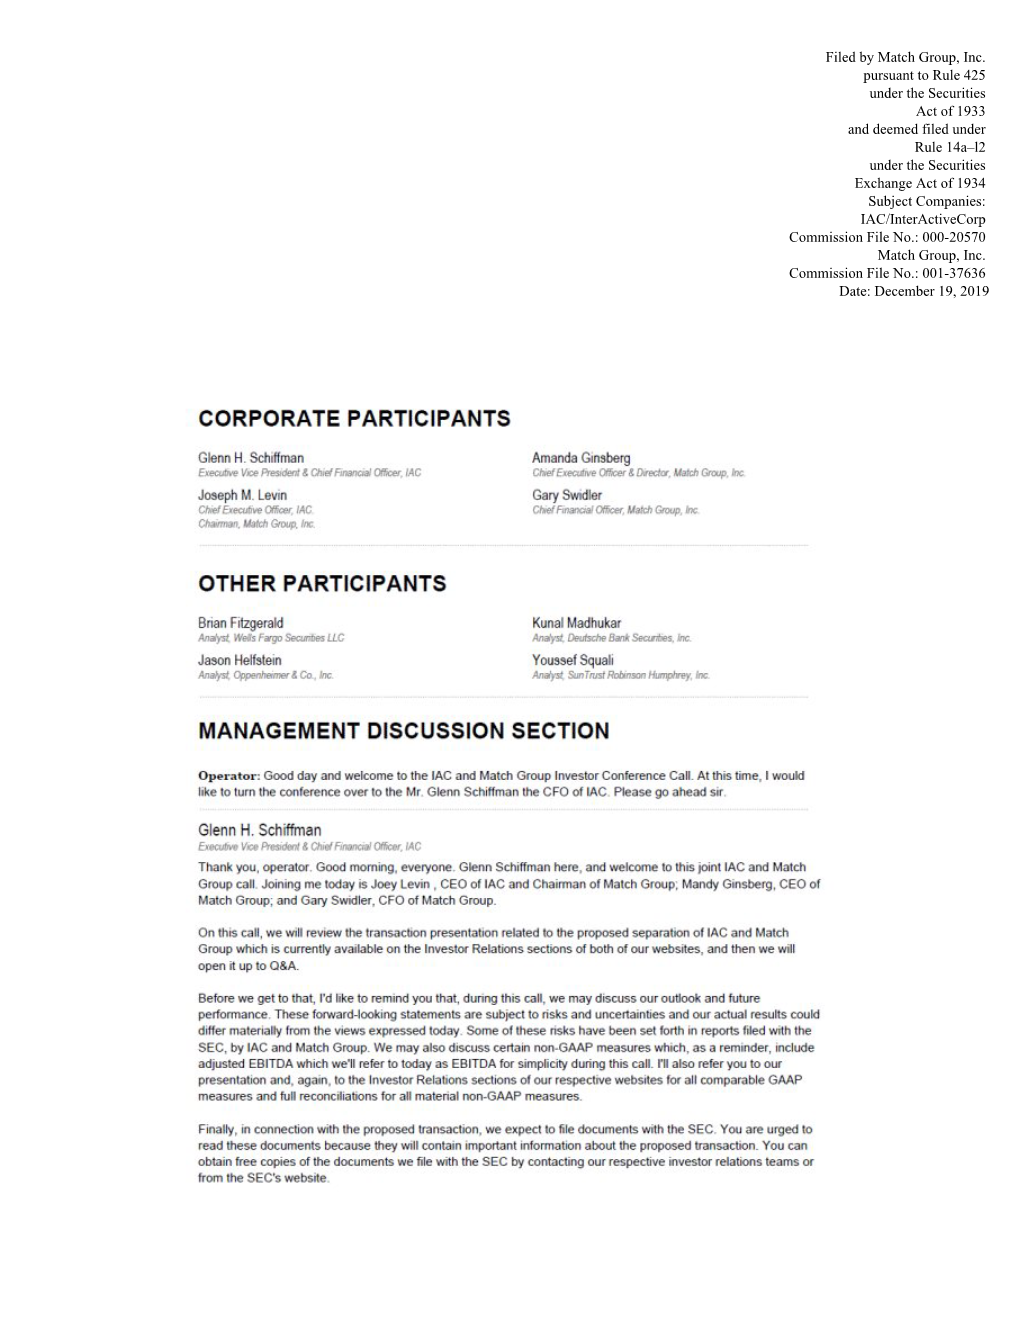 Filed by Match Group, Inc. Pursuant to Rule 425 Under the Securities Act Of